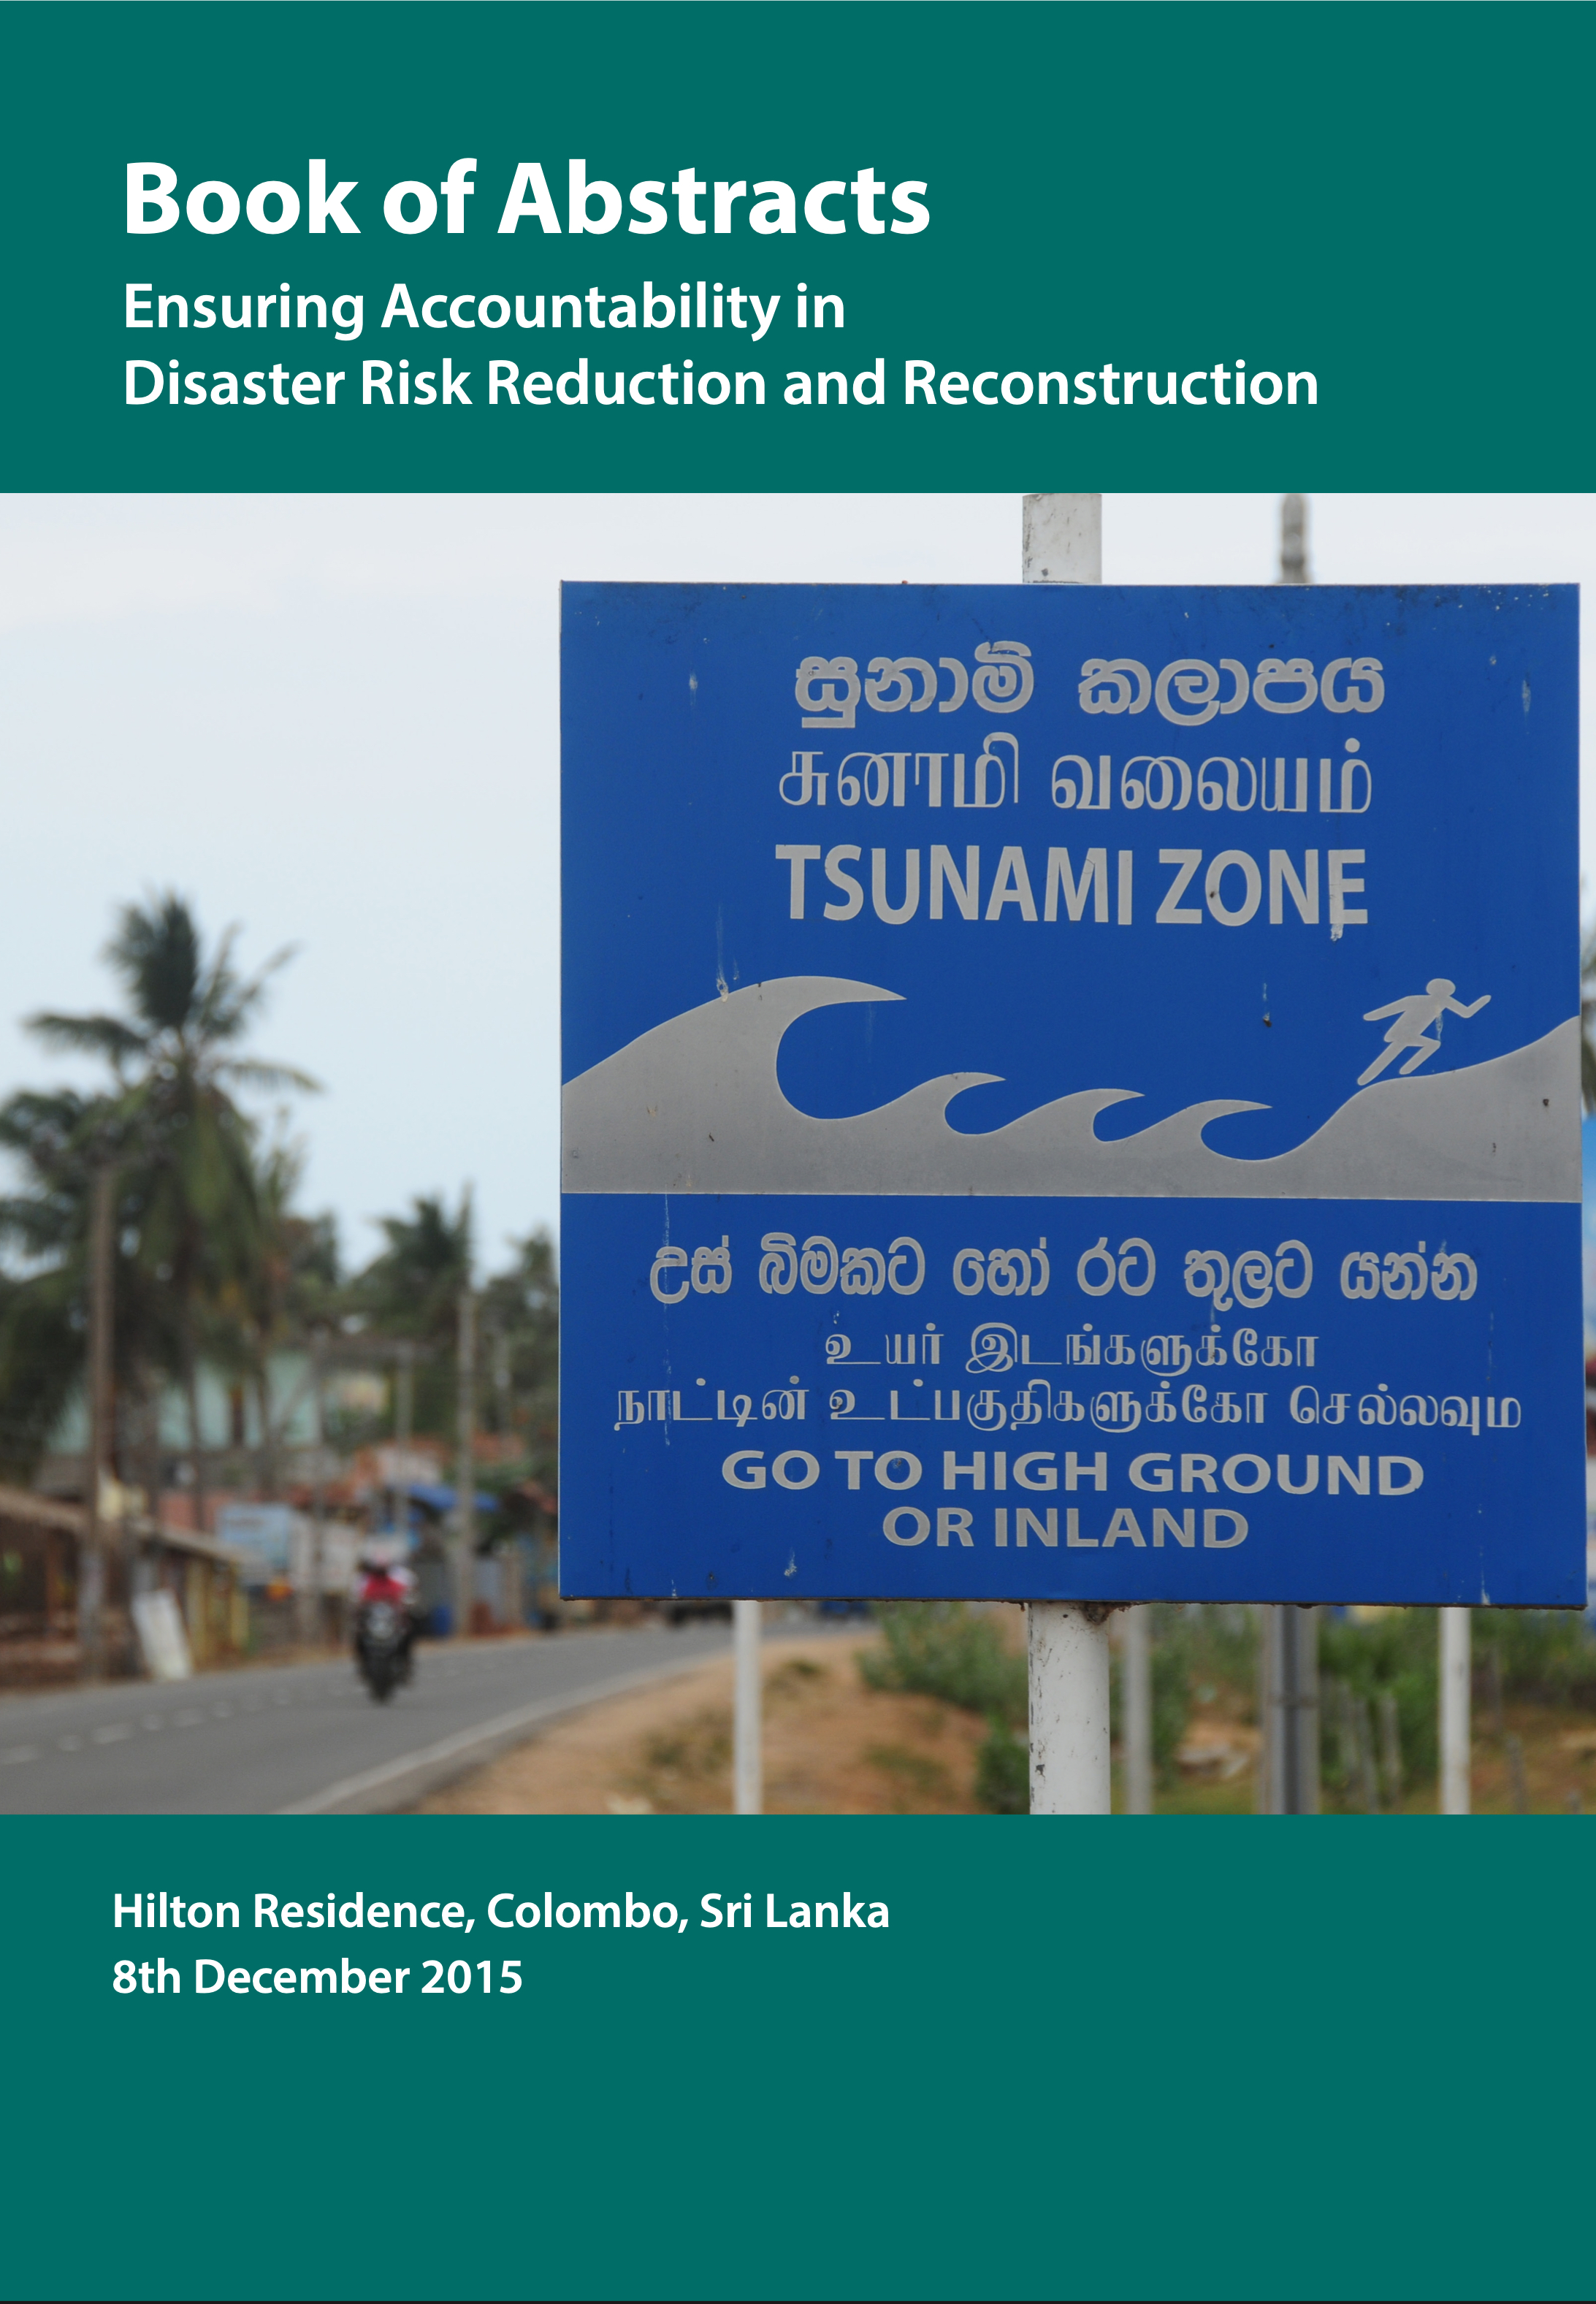 Ensuring Accountability in Disaster Risk Reduction and Reconstruction